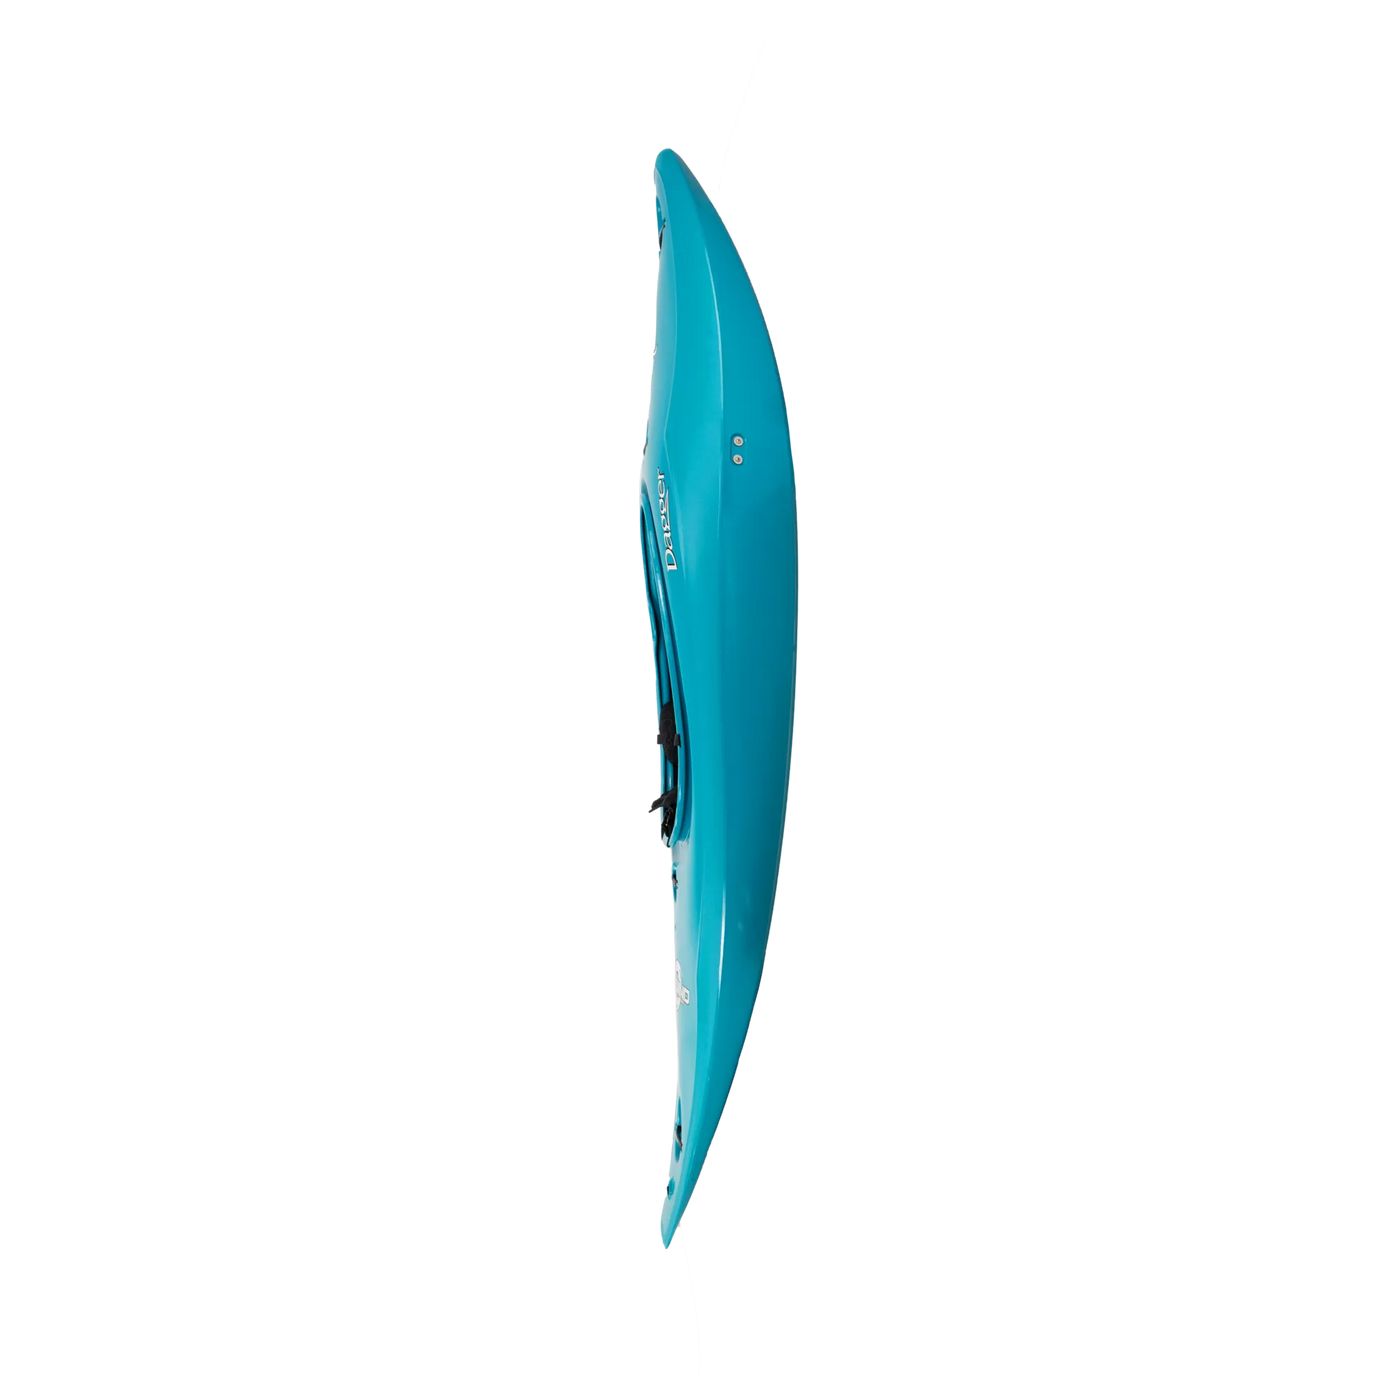 dagger rewind small turquoise side